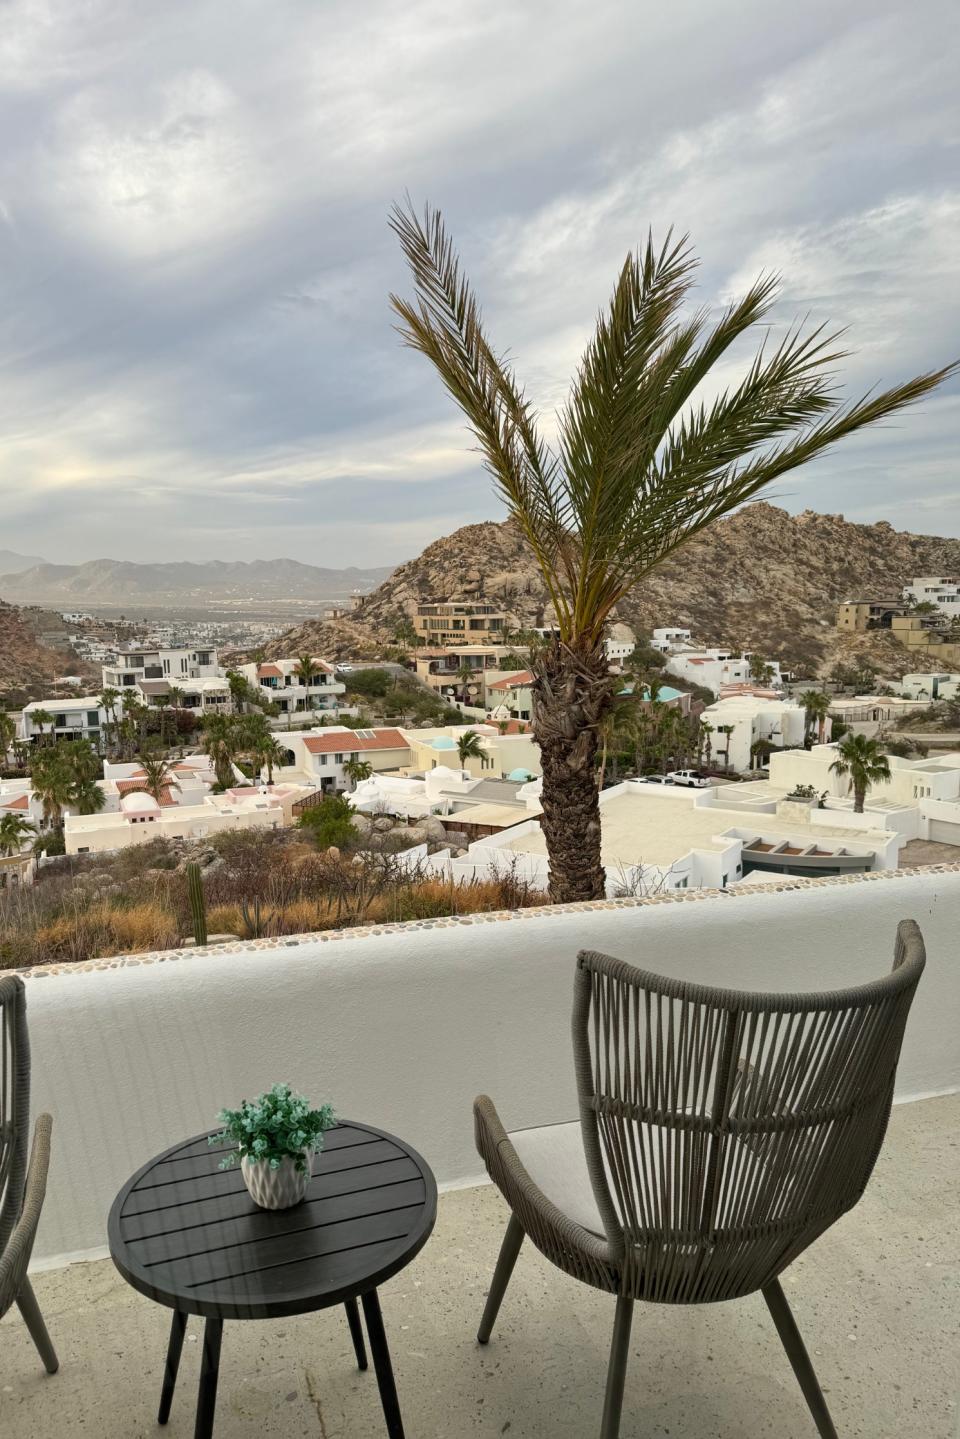 Two woven chairs and a small table with a potted plant overlook a scenic view of a hillside community featuring various houses and palm trees